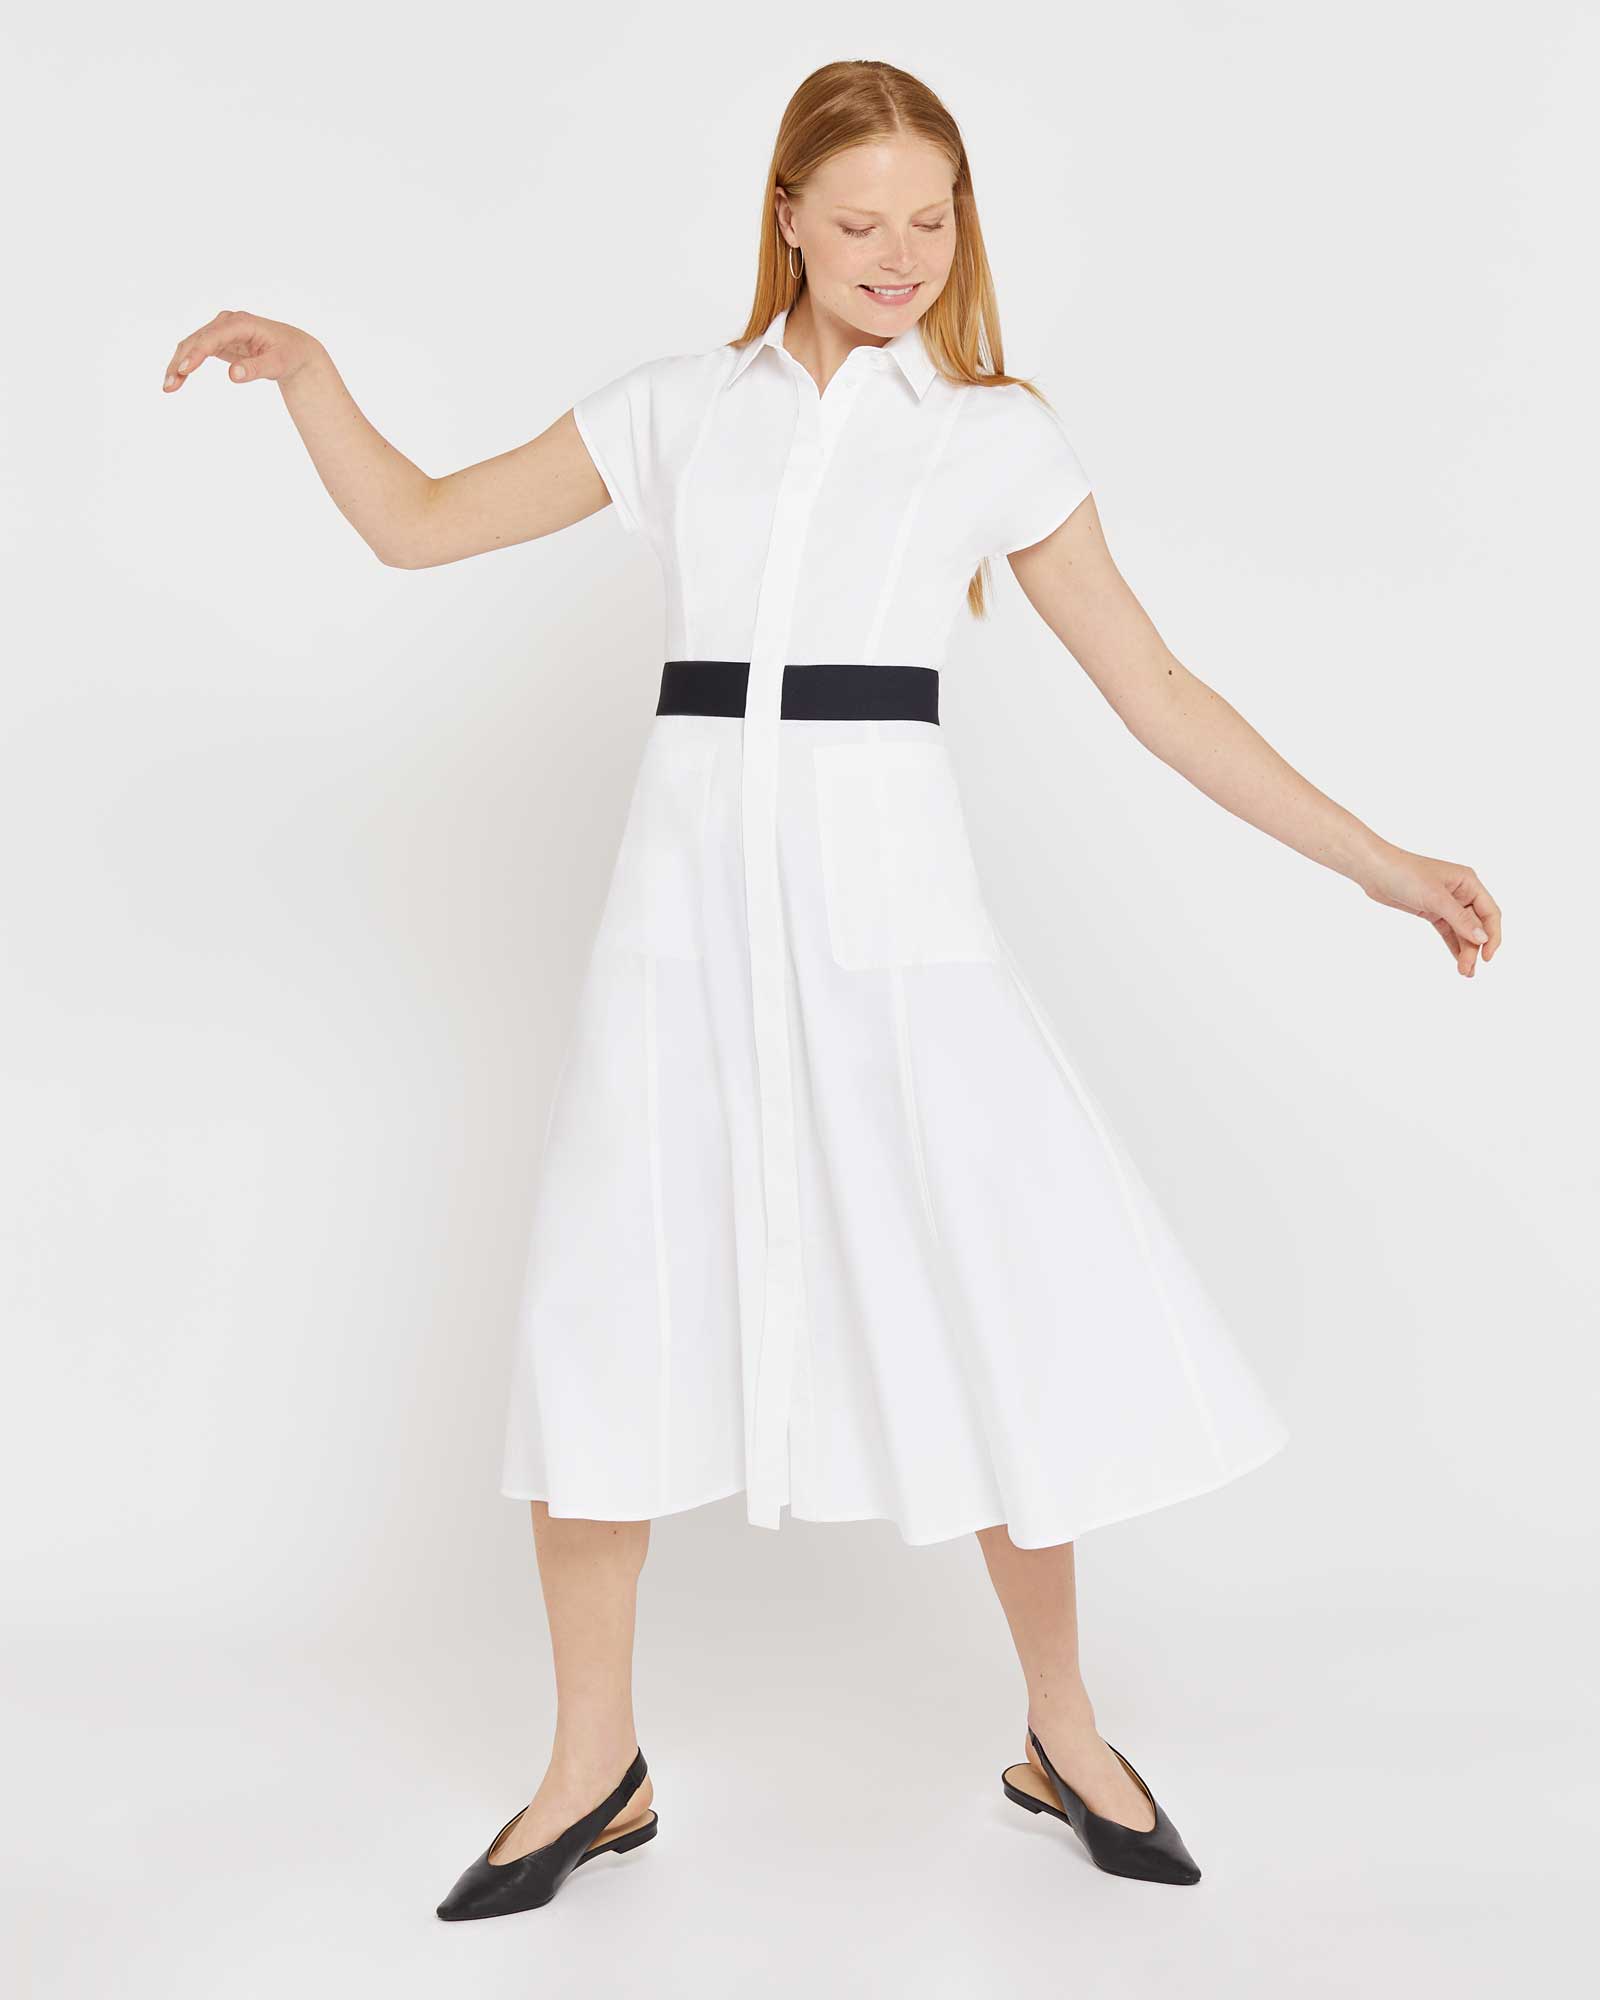 Happiness Is A Shirt Dress White - Final Sale